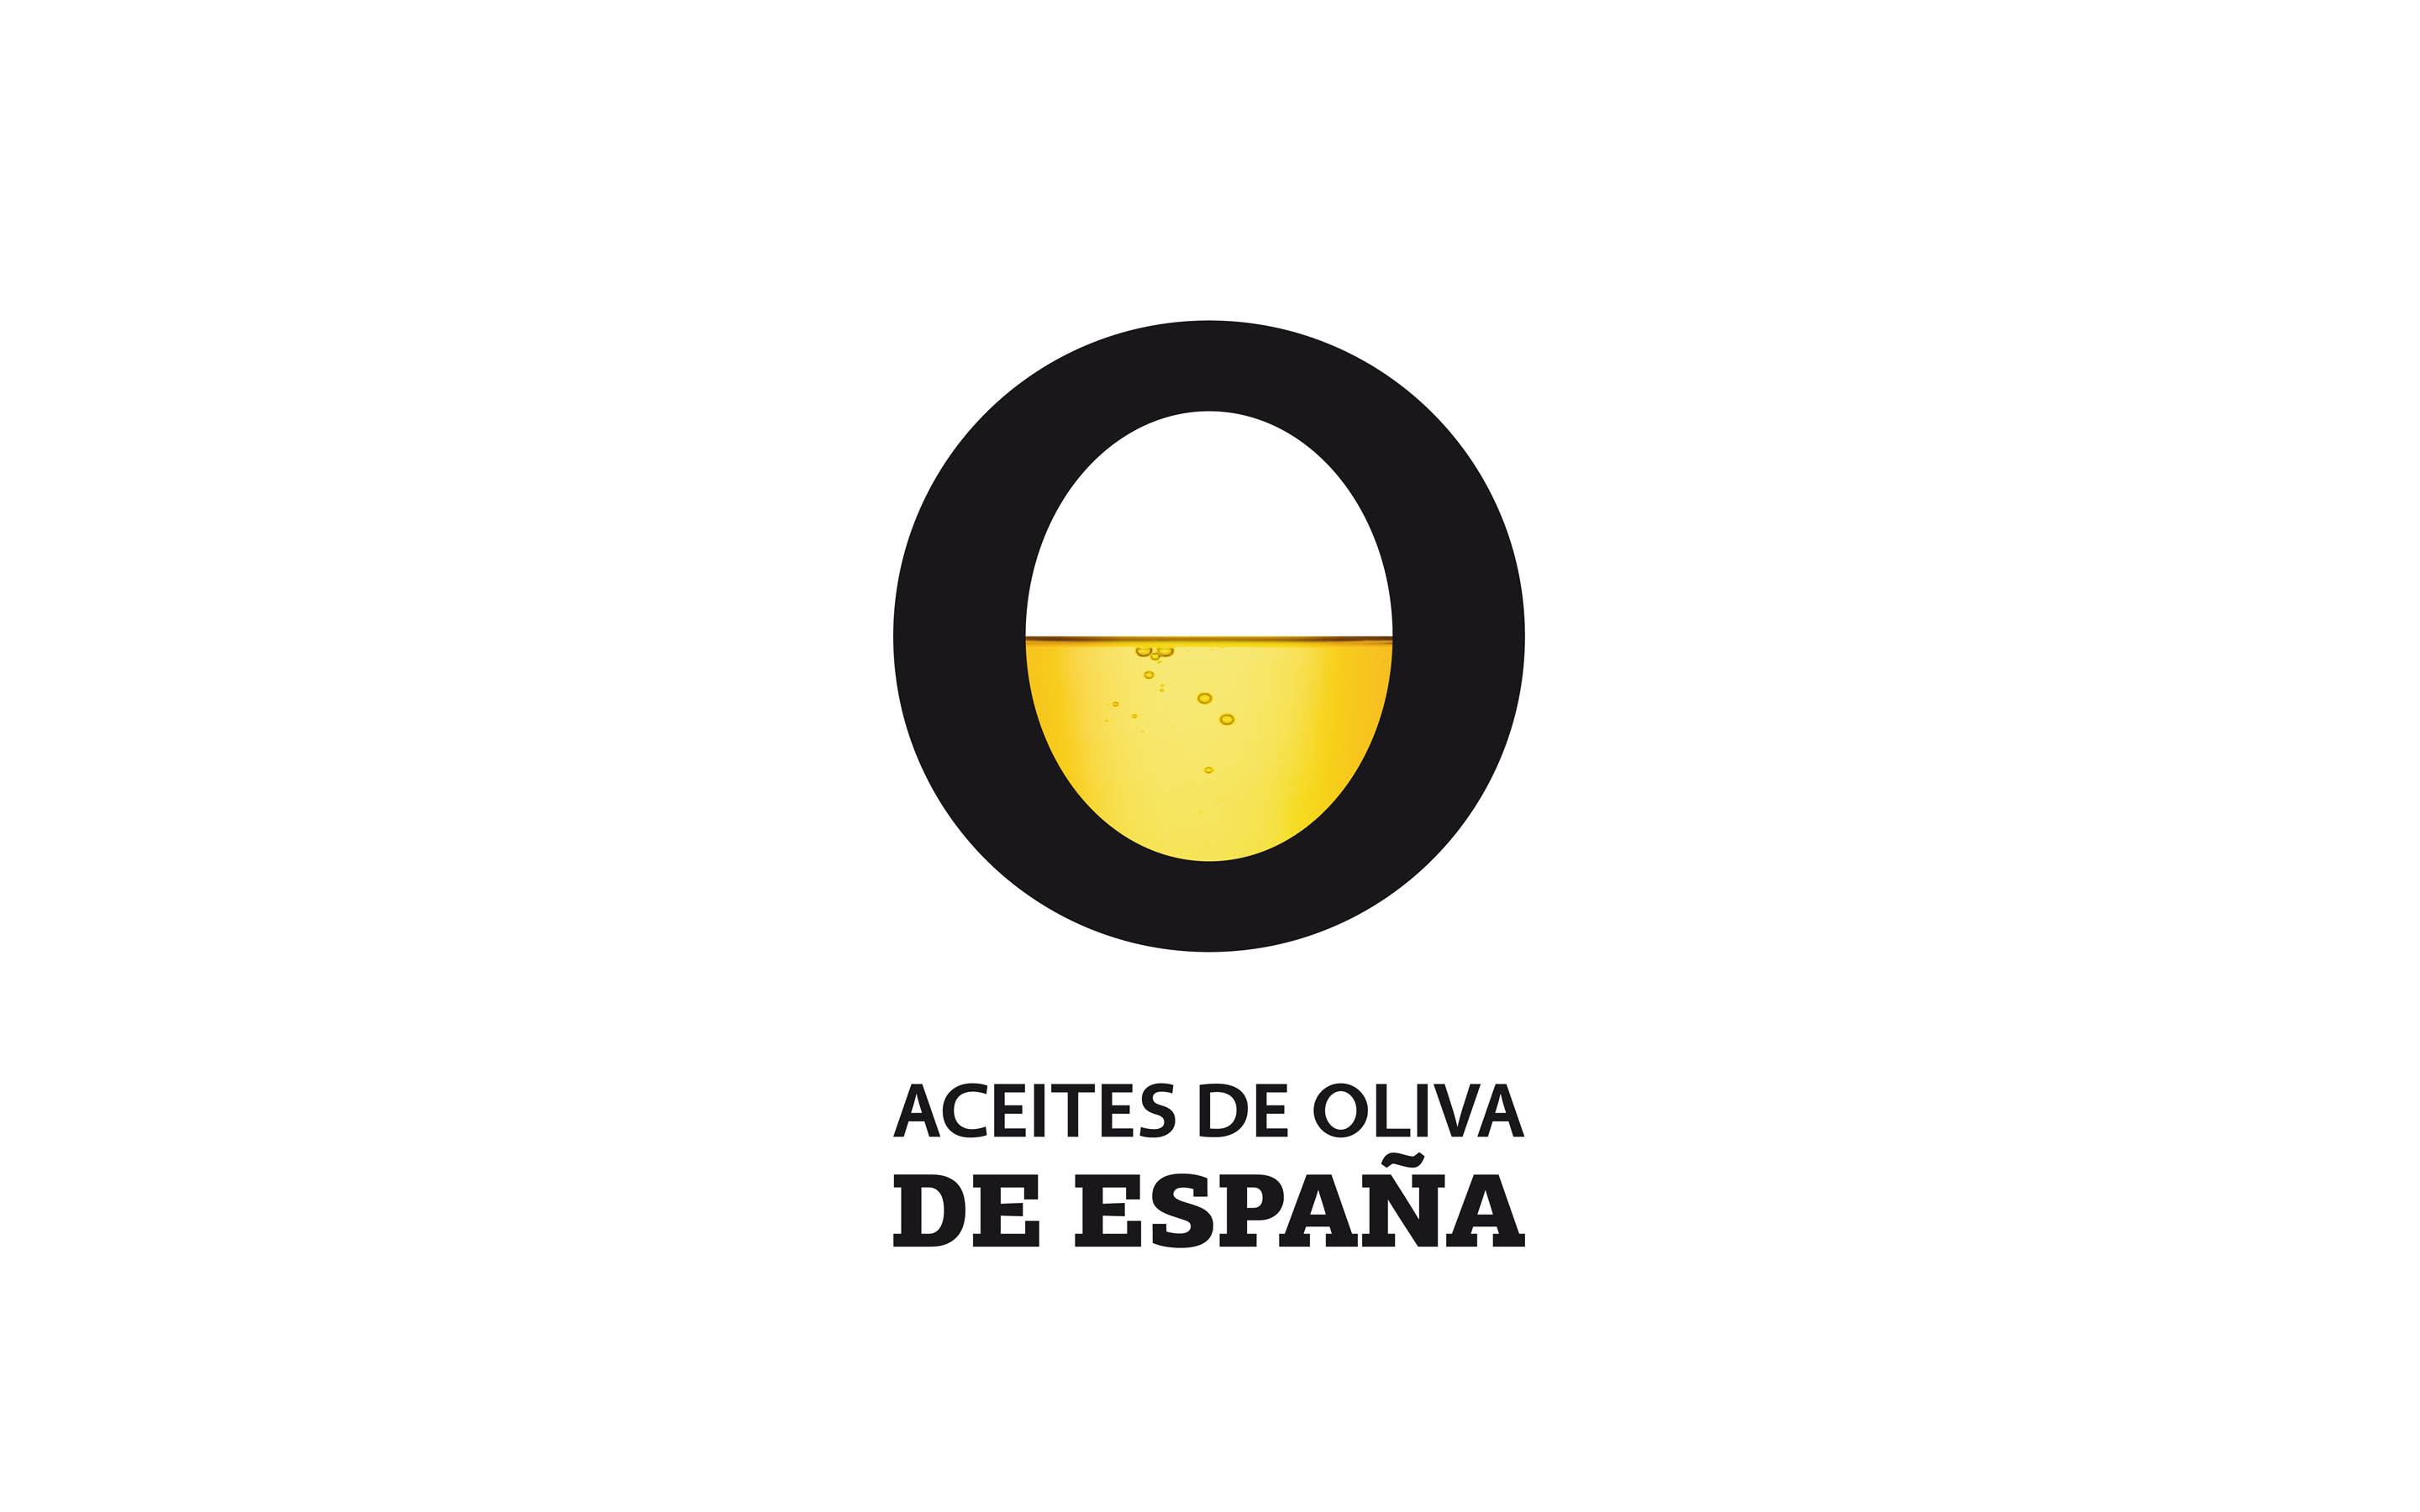 Aceites de Oliva de España is a non-profit interprofessional organization that acts as a prescriber of Spanish olive oil and which, in order to achieve international relevance, needed a brand that represents the essence of an entire cuisine.
